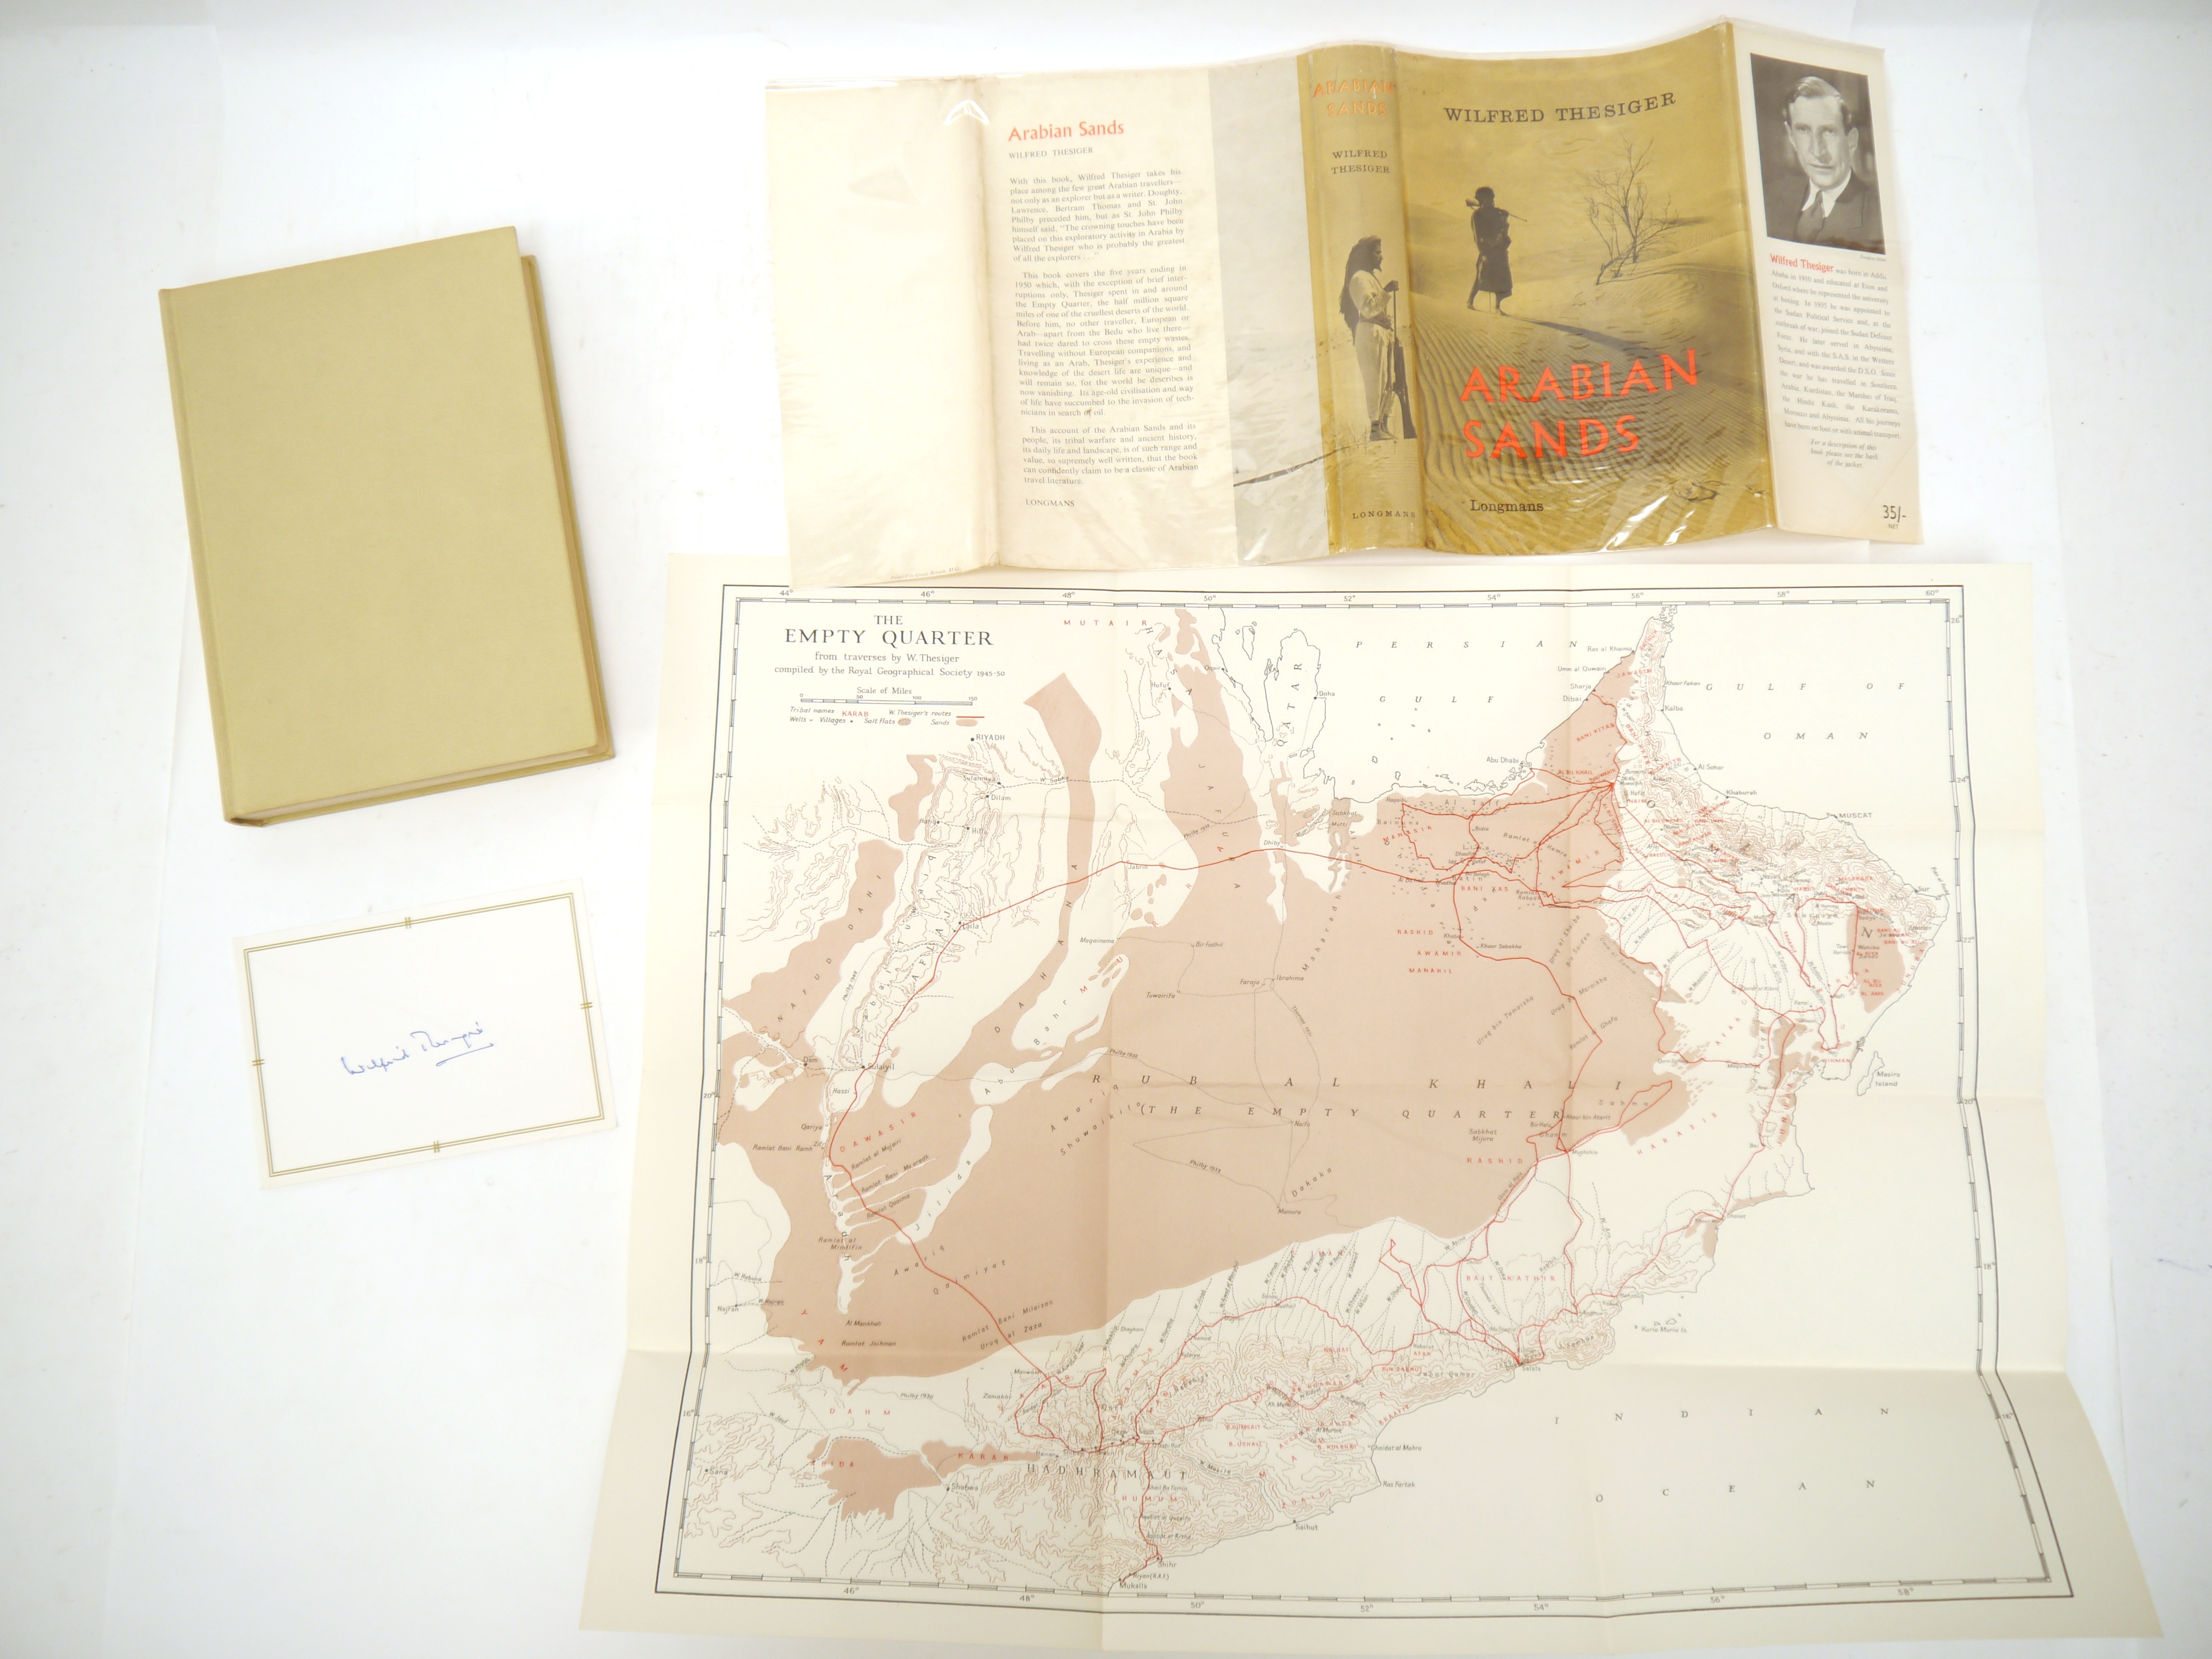 Wilfred Thesiger: 'Arabian Sands', London, Longmans, 1959, 1st edition, card signed by Thesiger in - Bild 5 aus 7